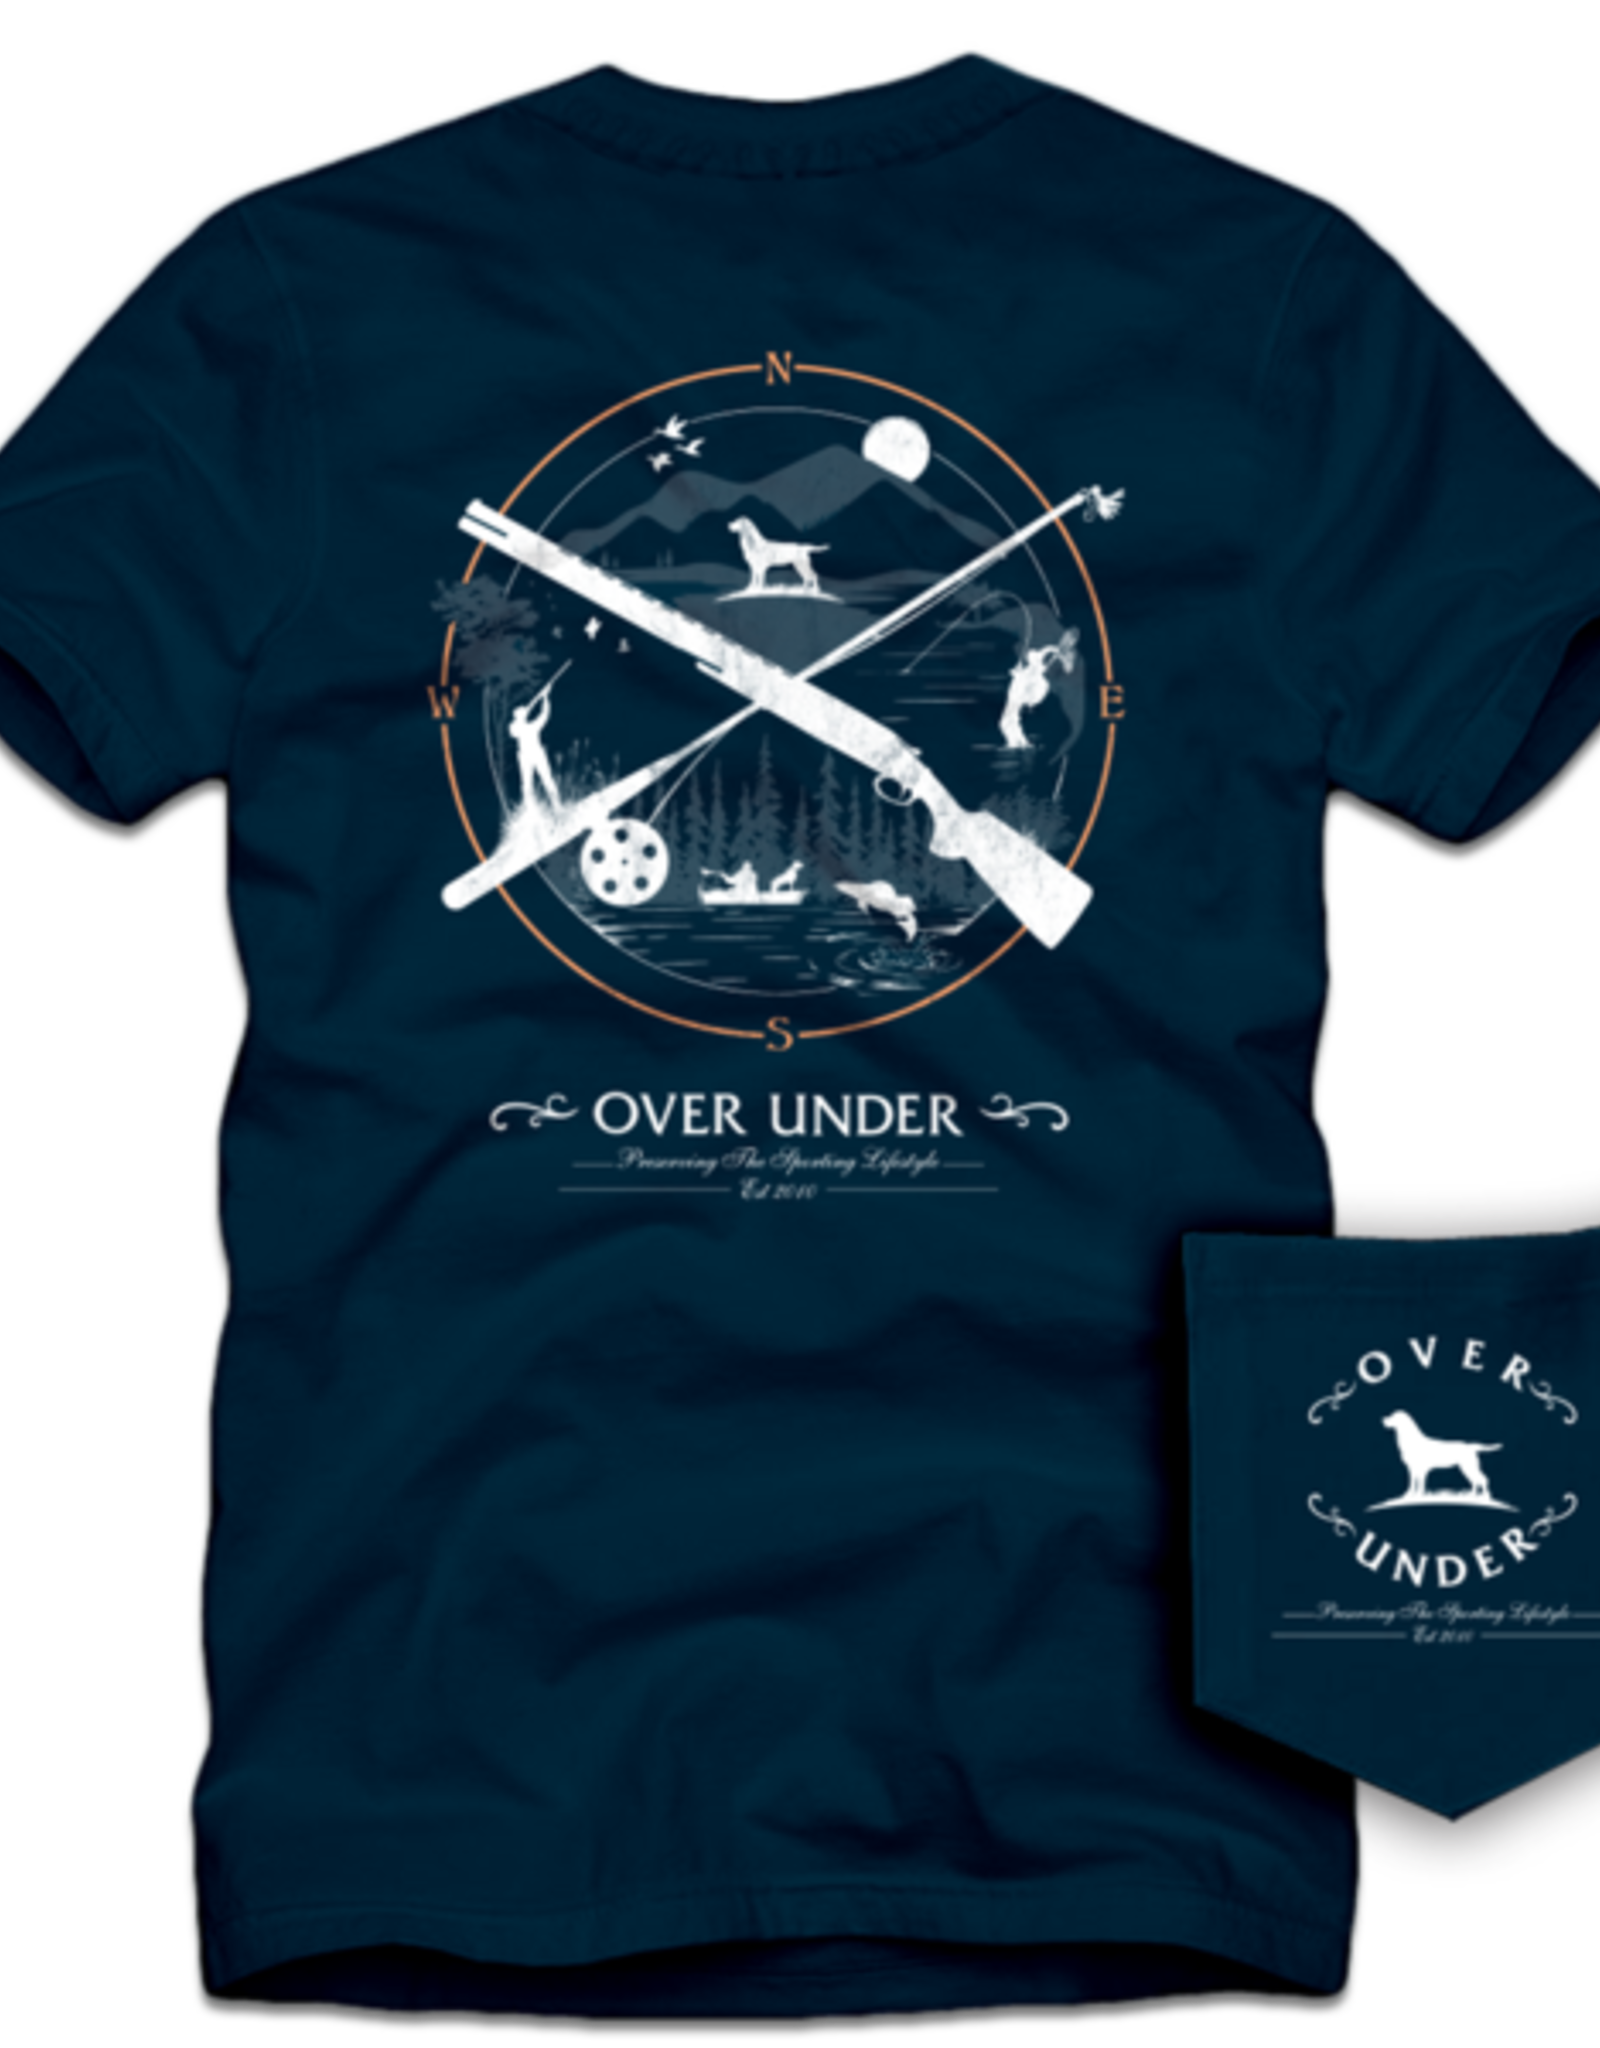 Over Under Clothing Get Outside Tee